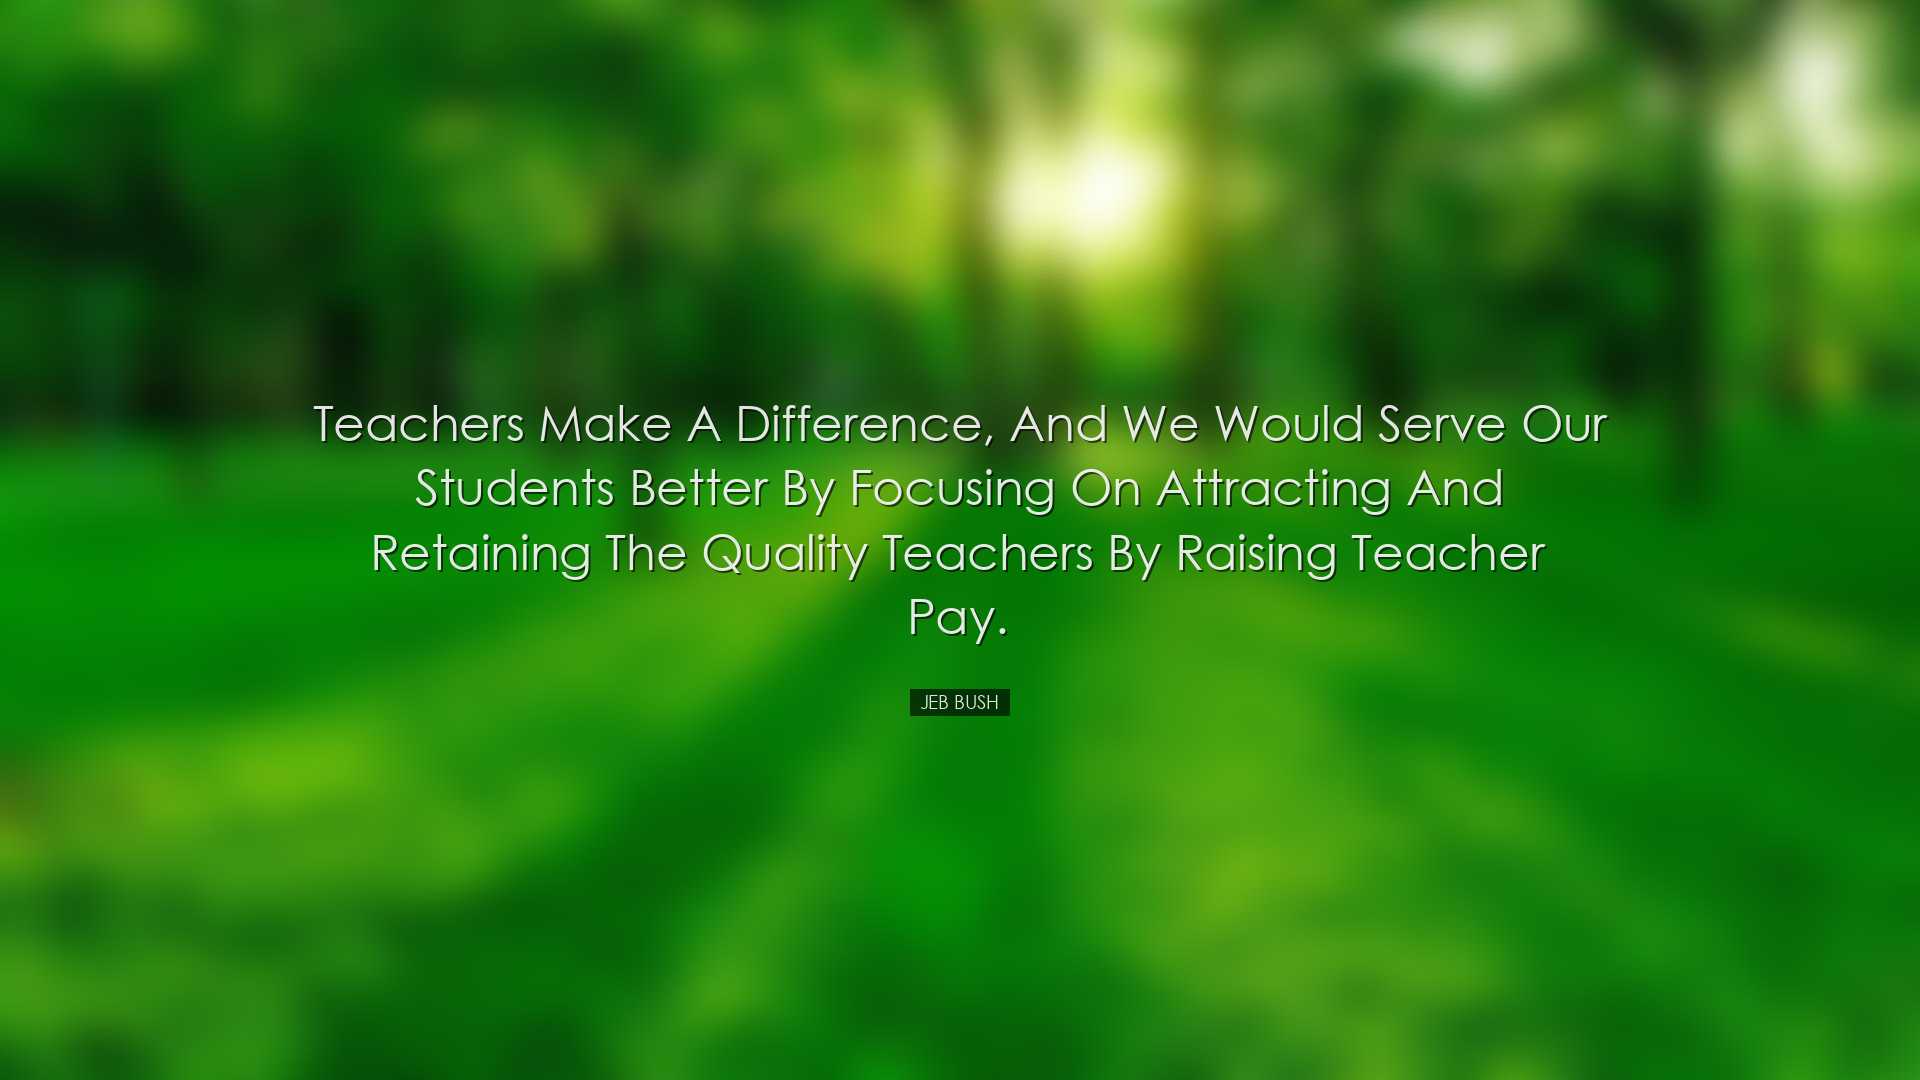 Teachers make a difference, and we would serve our students better